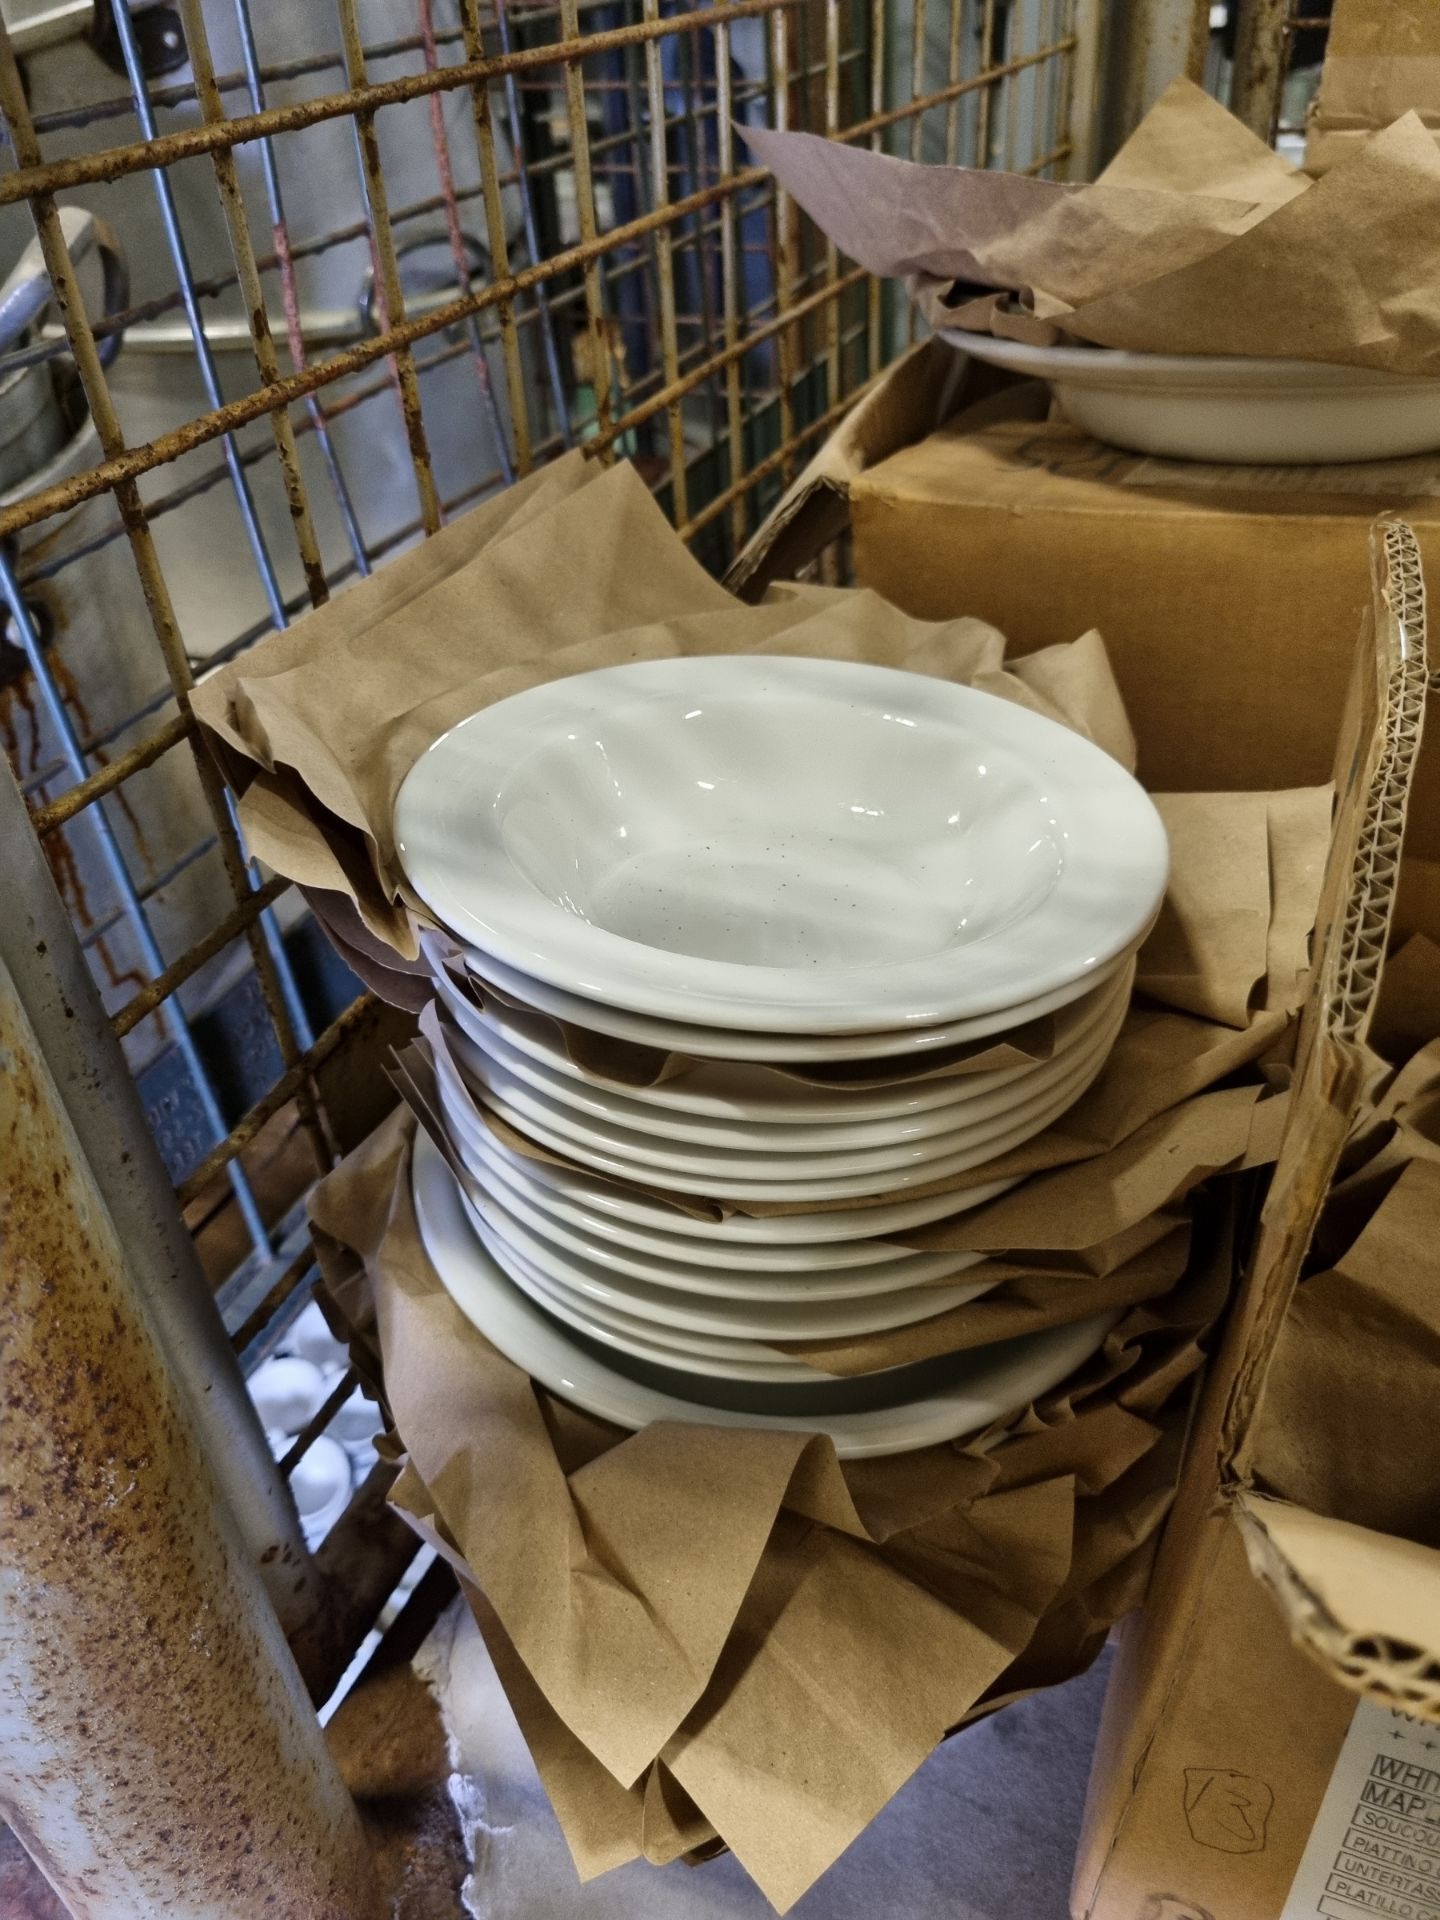 Catering Equipment - White plates, saucers, bowls, cups, teapot, salt + pepper pot - Image 6 of 8